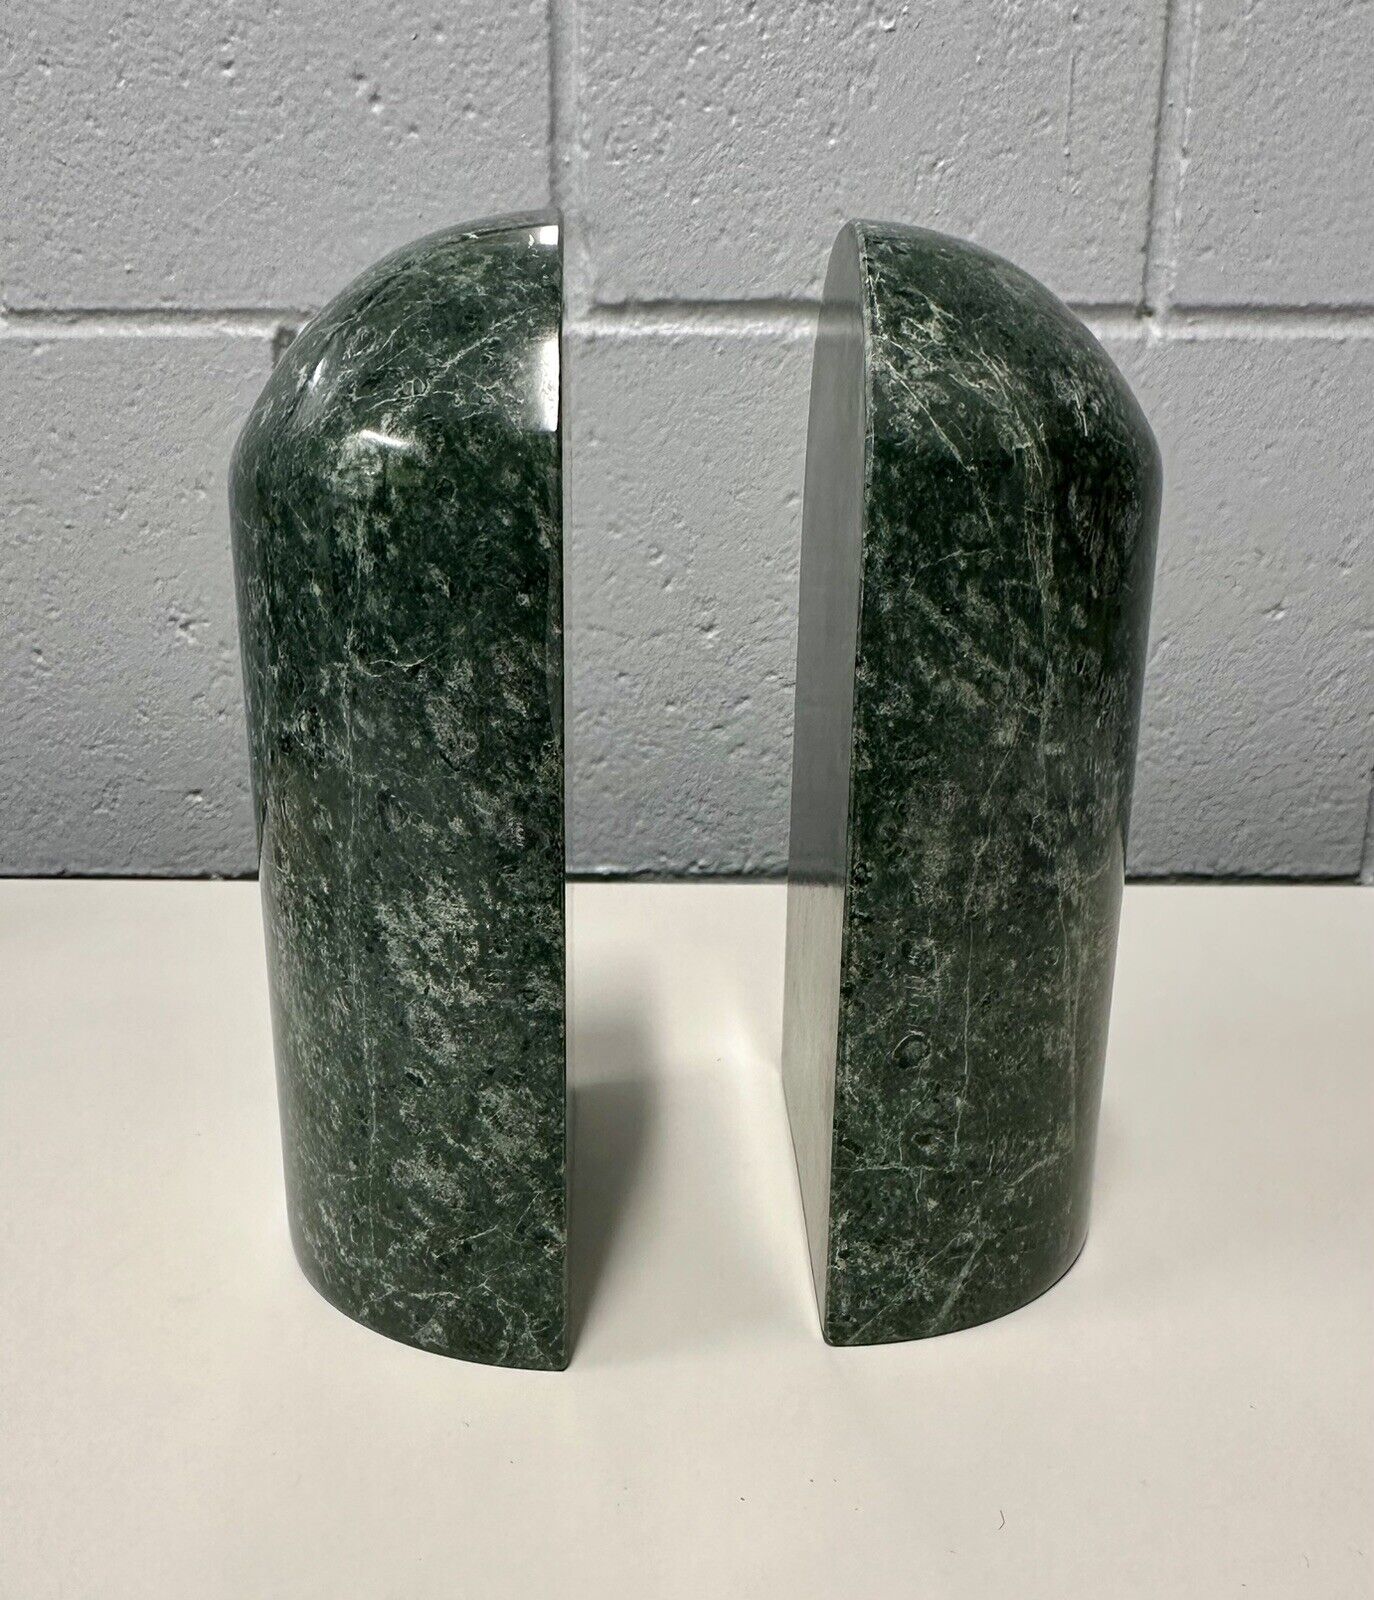 VINTAGE - Green Marble Granite Stone Bookends - Half Columns - Pier One Imports